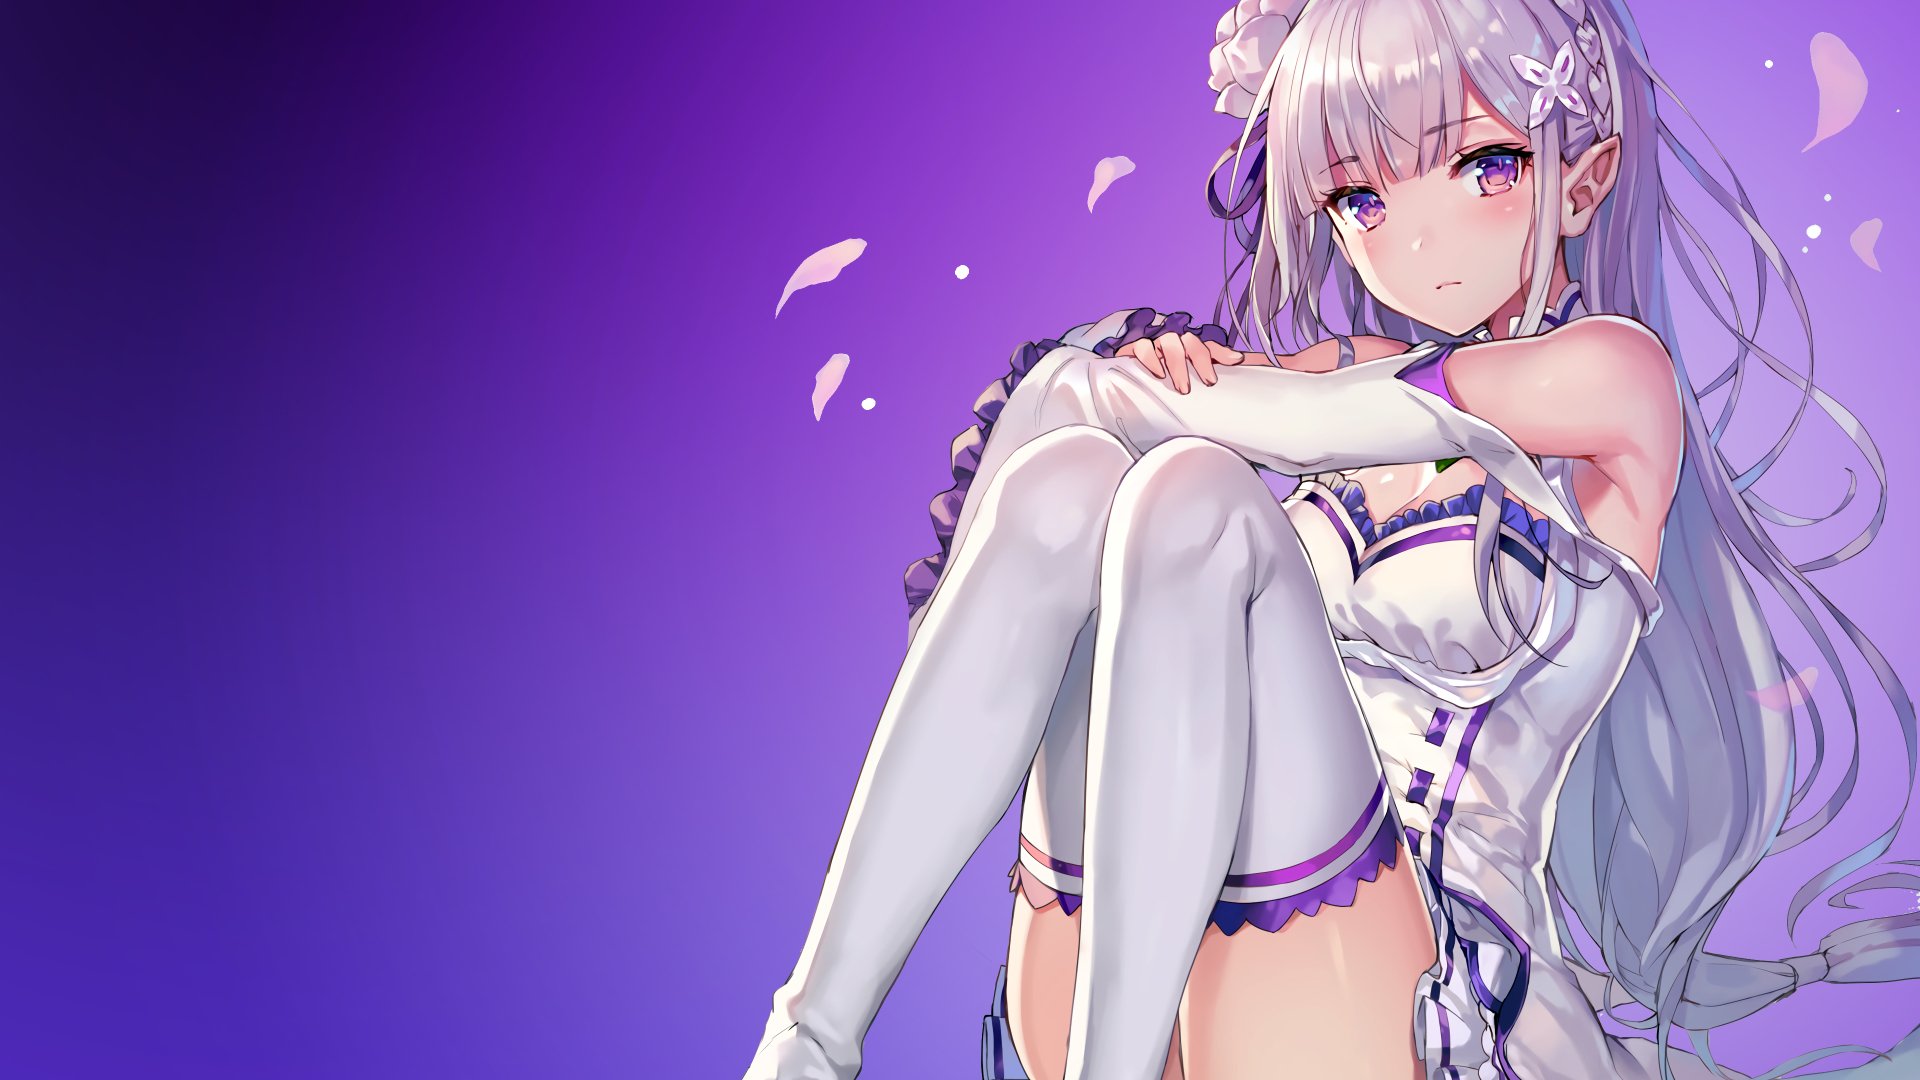 Anime Re:ZERO -Starting Life in Another World- 4k Ultra HD Wallpaper by AssassinWarrior